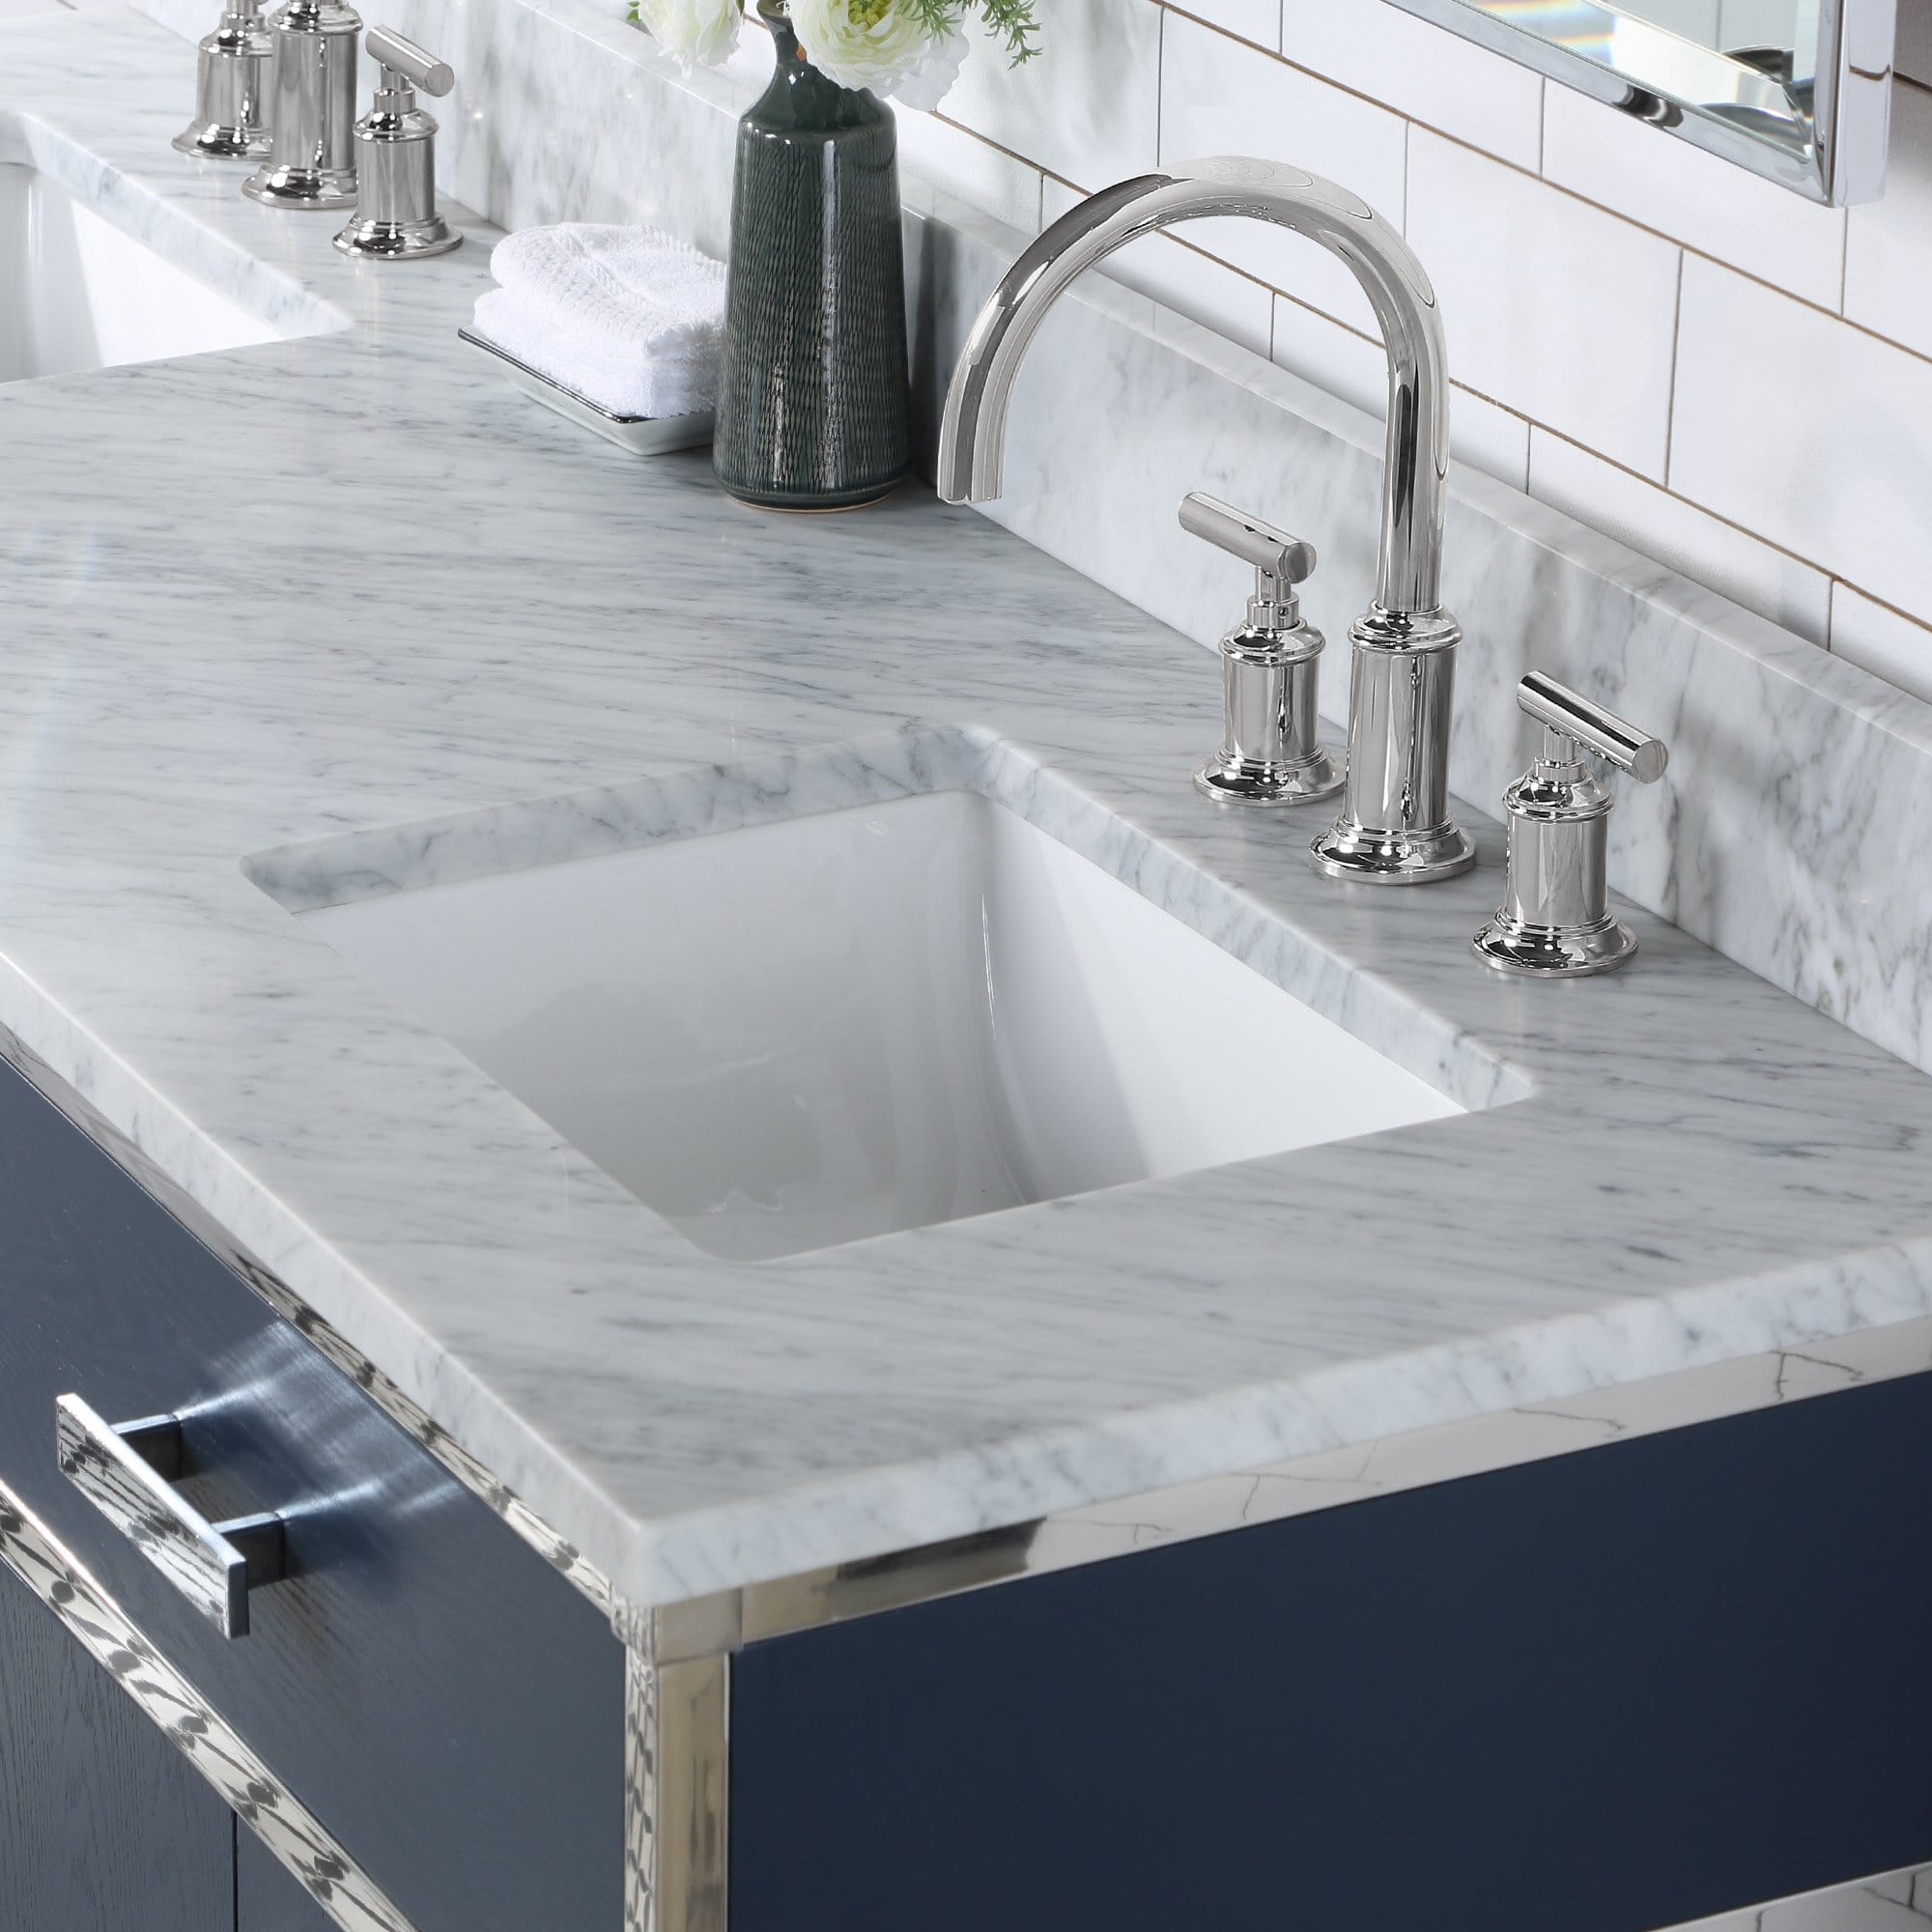 Water Creation Marquis 72 In. Double Sink Carrara White Marble Countertop Vanity in Monarch Blue with Hook Faucets and Mirrors - Molaix732030765993Bathroom vanityMQ72CW01MB-E18BL1401